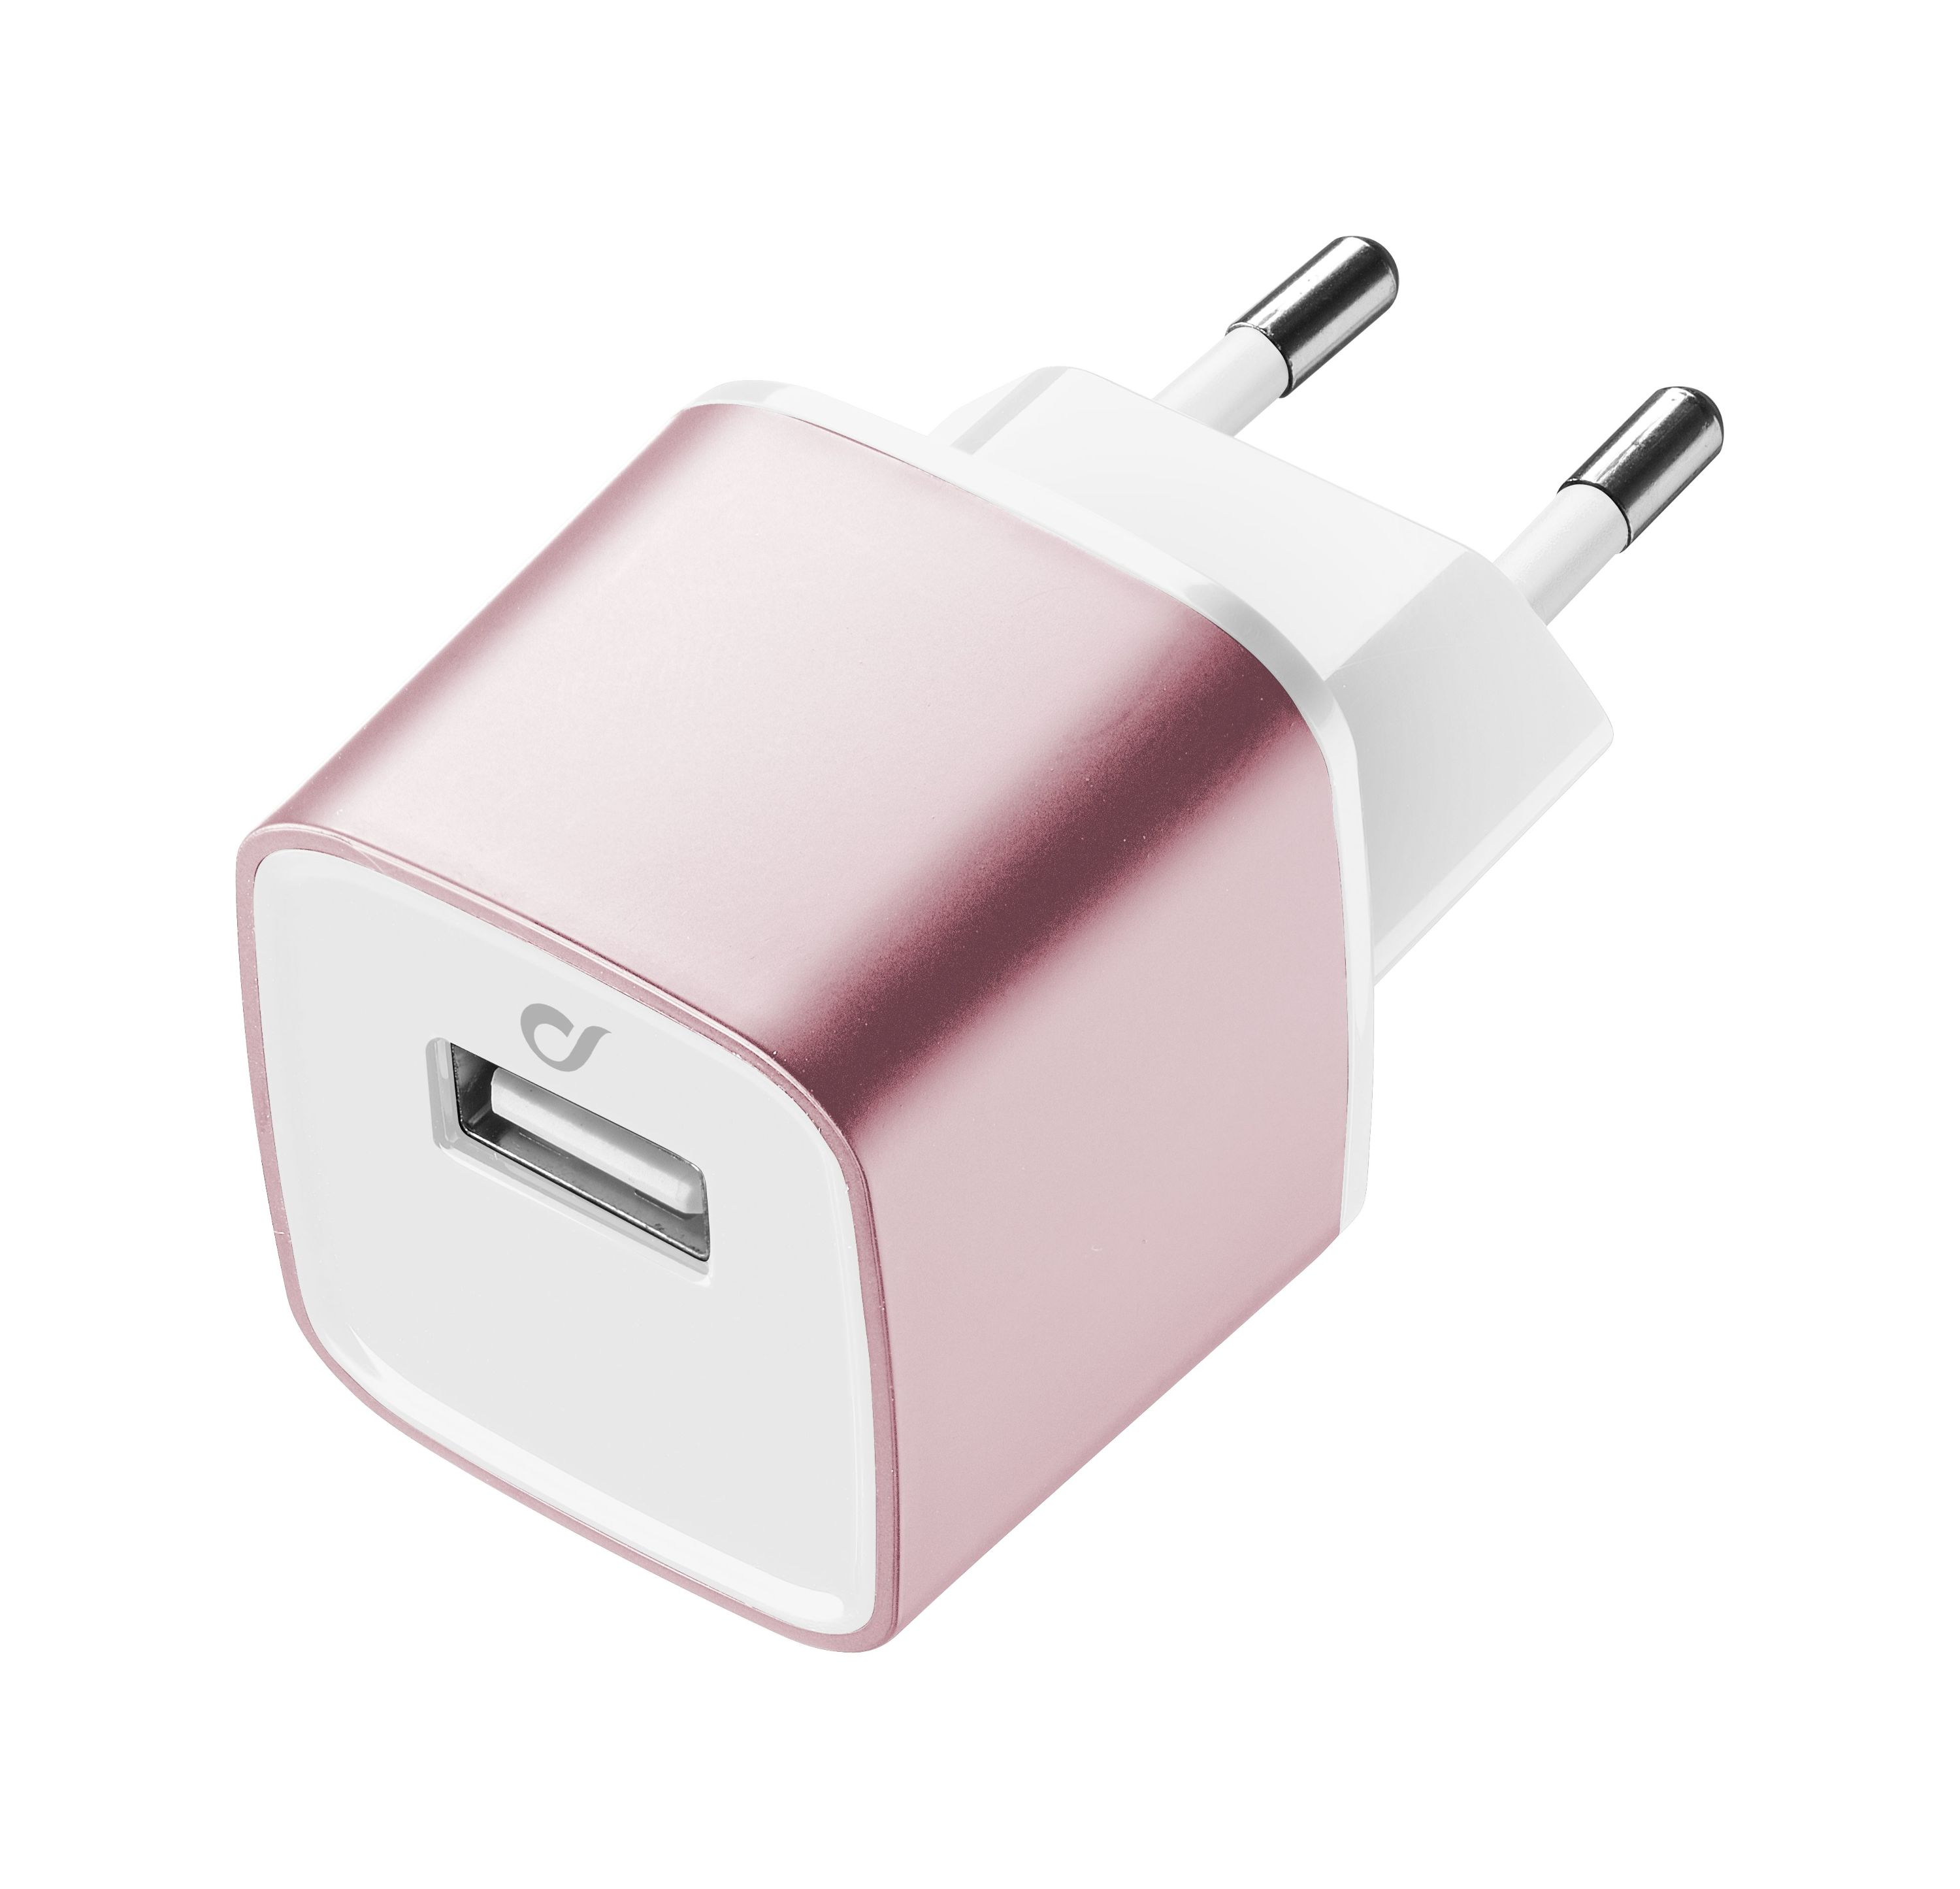 UD travel charger usb, 10W/2A Apple, pink